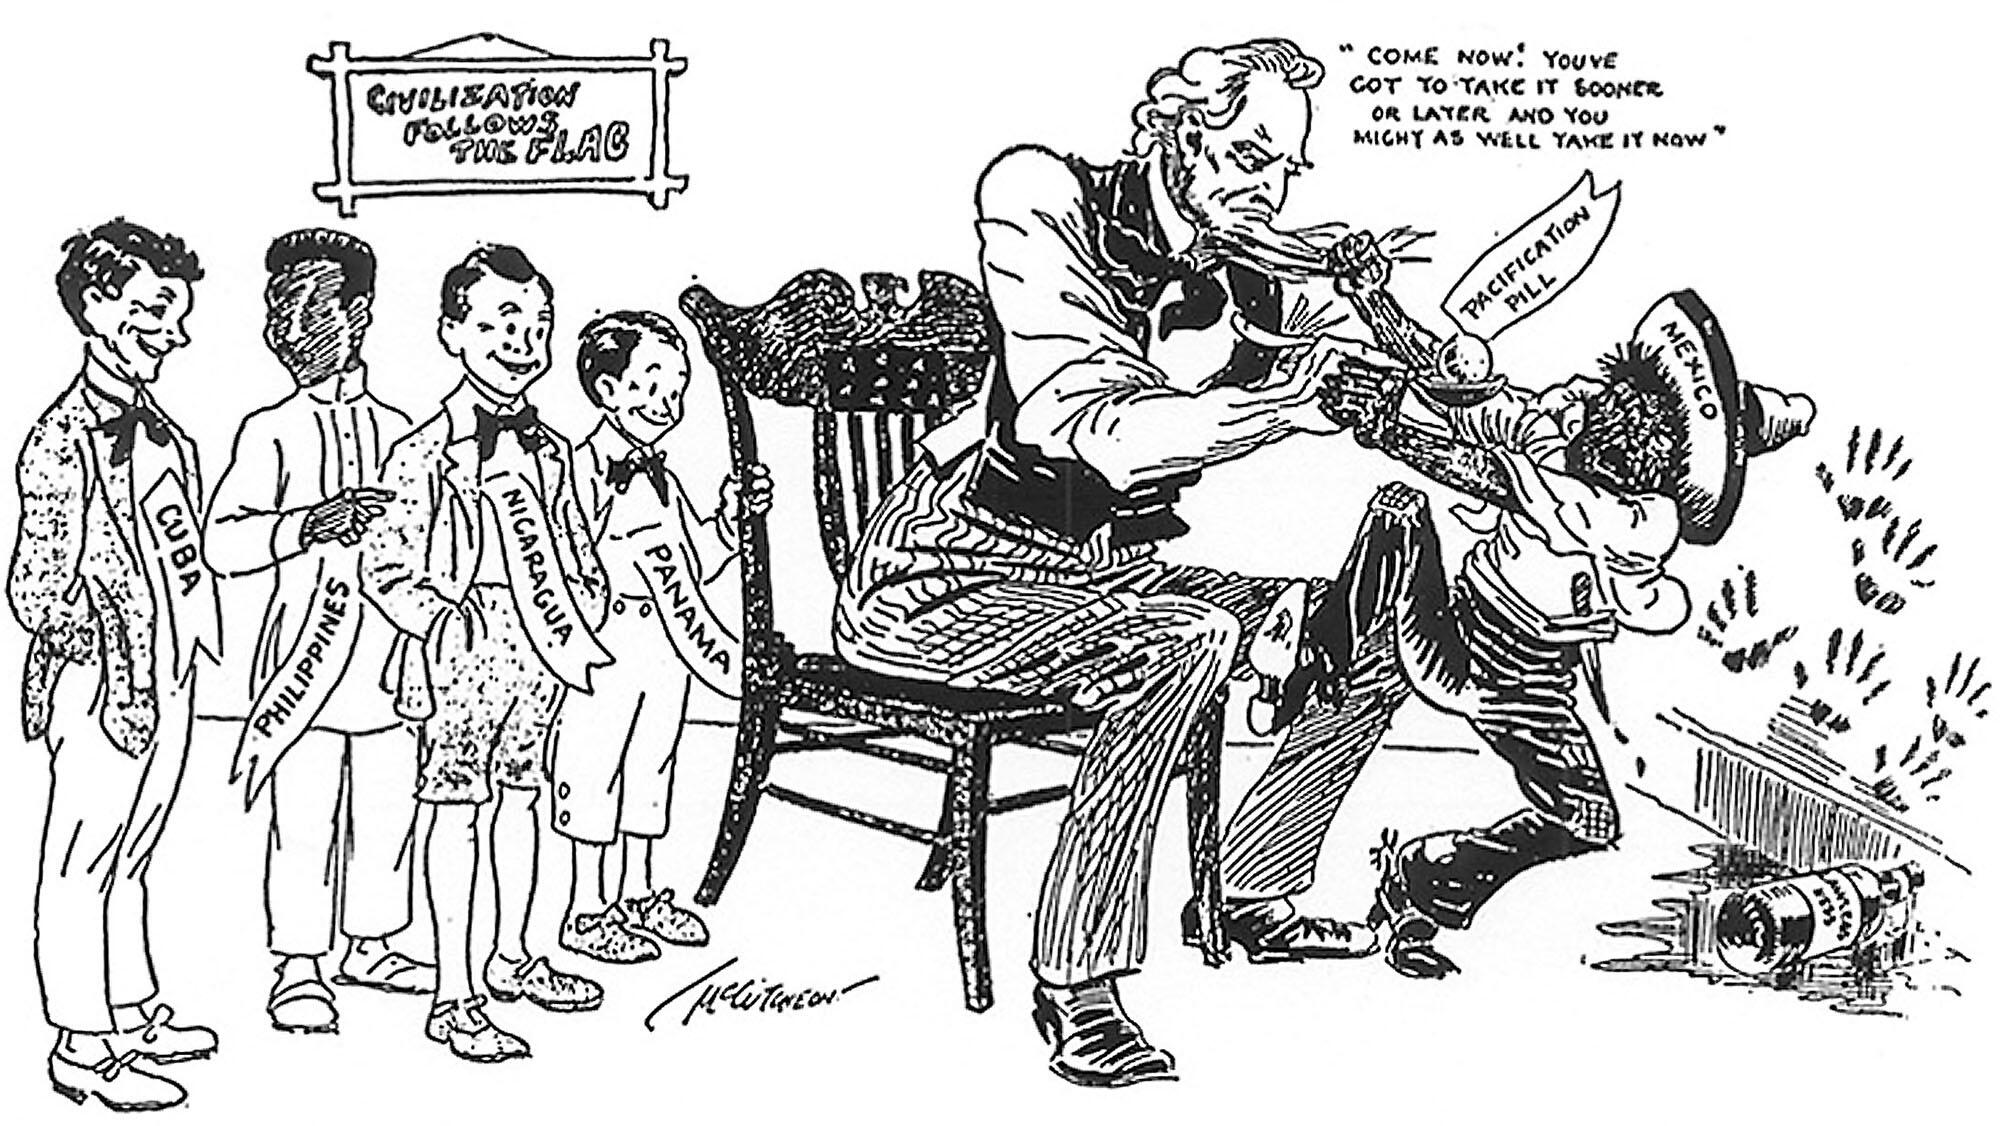 A U.S. editorial cartoon from 1916 shows Uncle Sam using a pill to “civilize” a wayward Mexico as other "good" countries look on. (Image by John T. McCutcheon.)